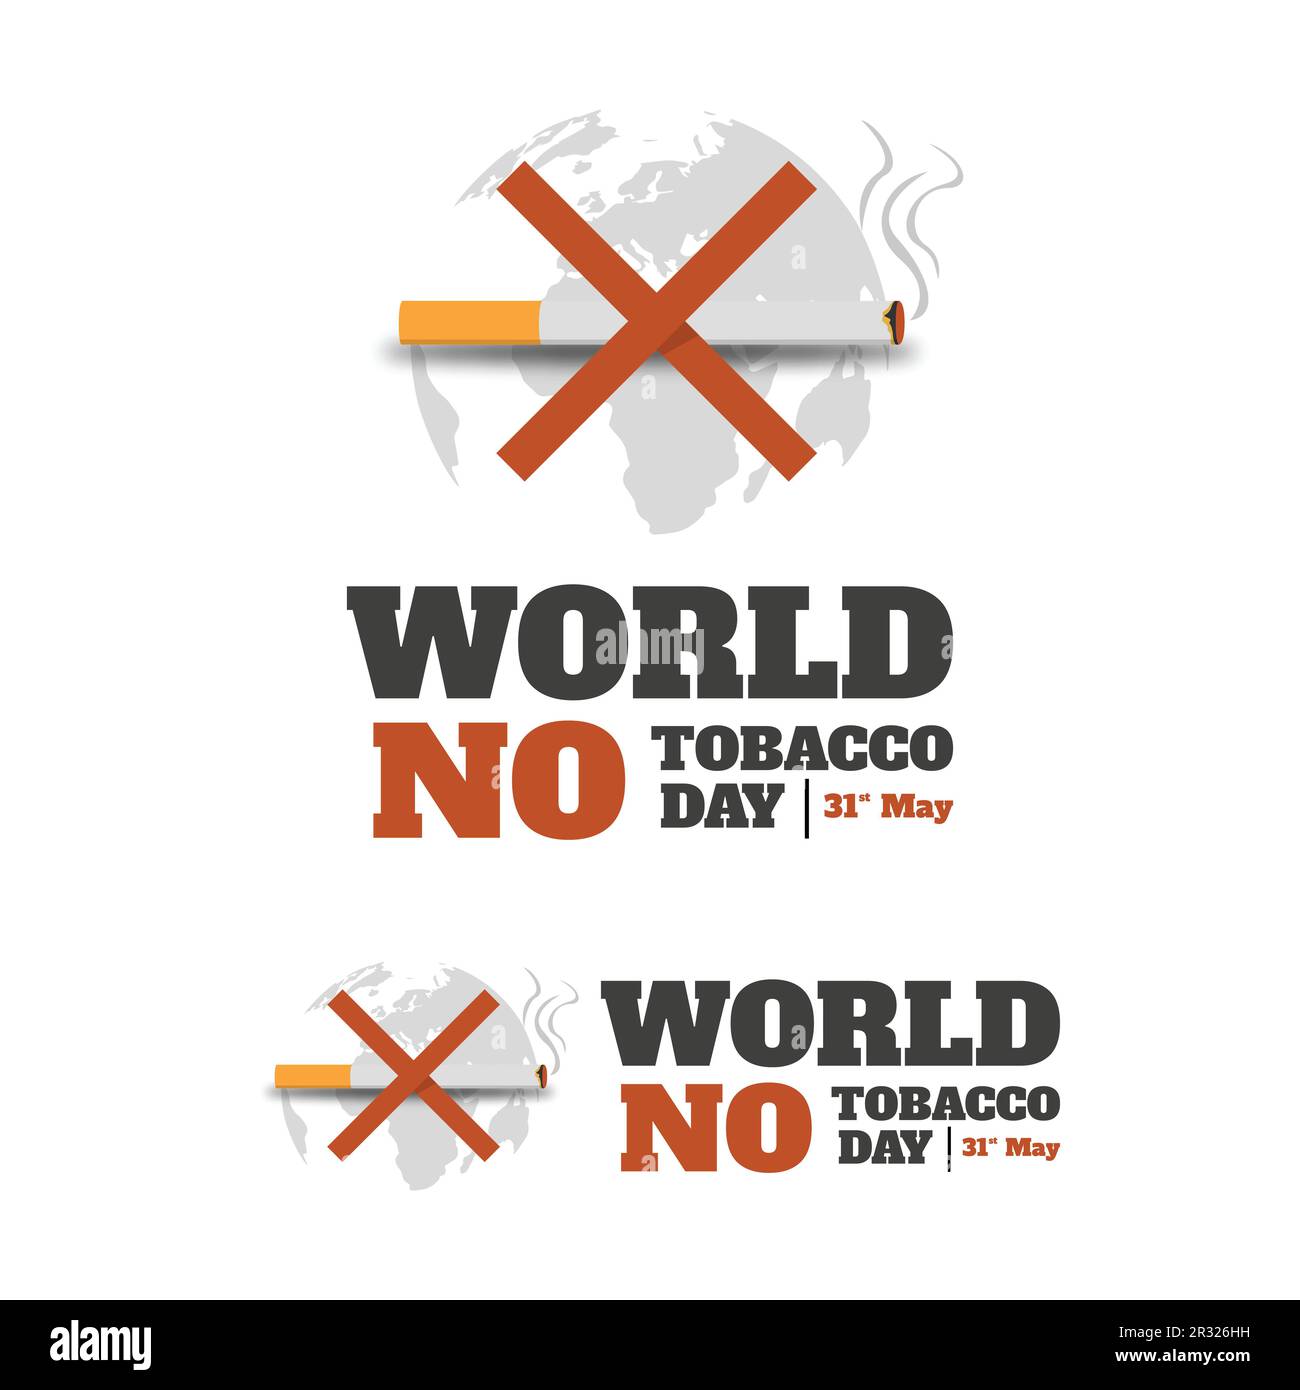 World no tobacco day vector image. Vector illustration, poster or banner for world no tobacco day. Stop tobacco Stock Vector